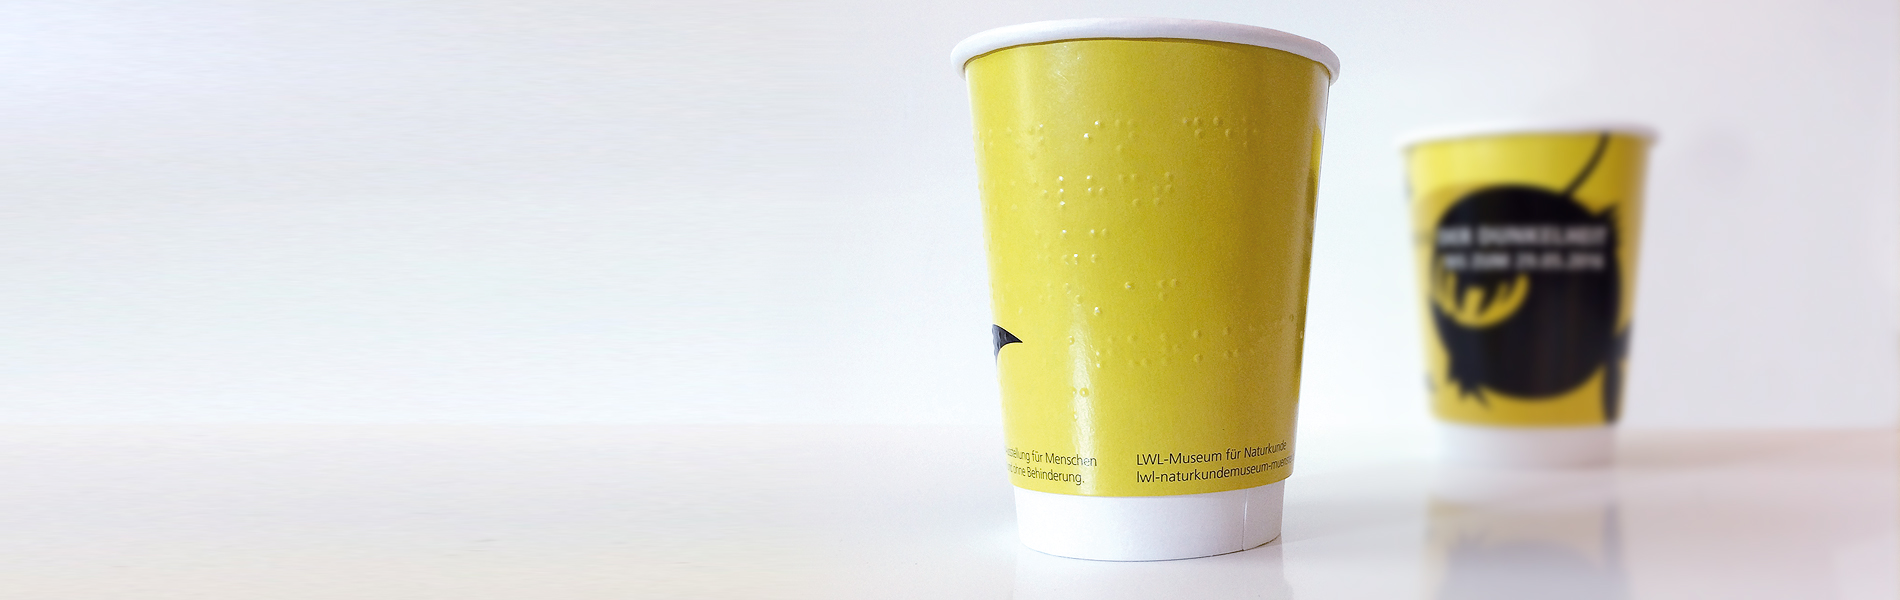 Braille printed paper cup by cupprint